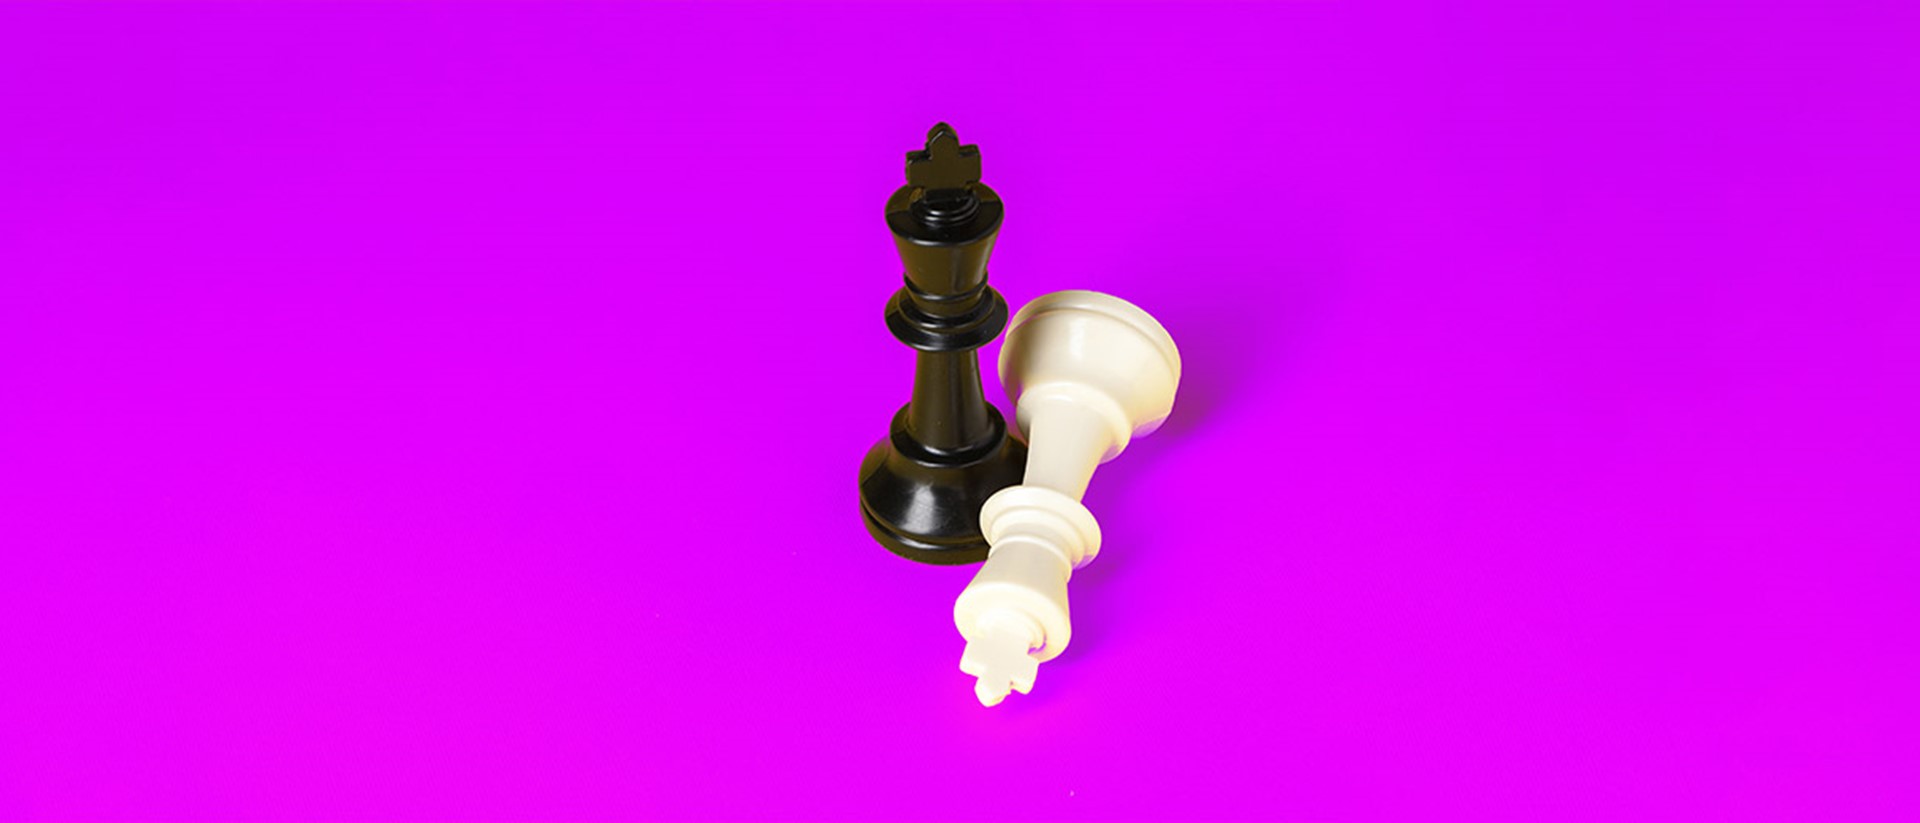 Hero image of chess pieces on a purple background